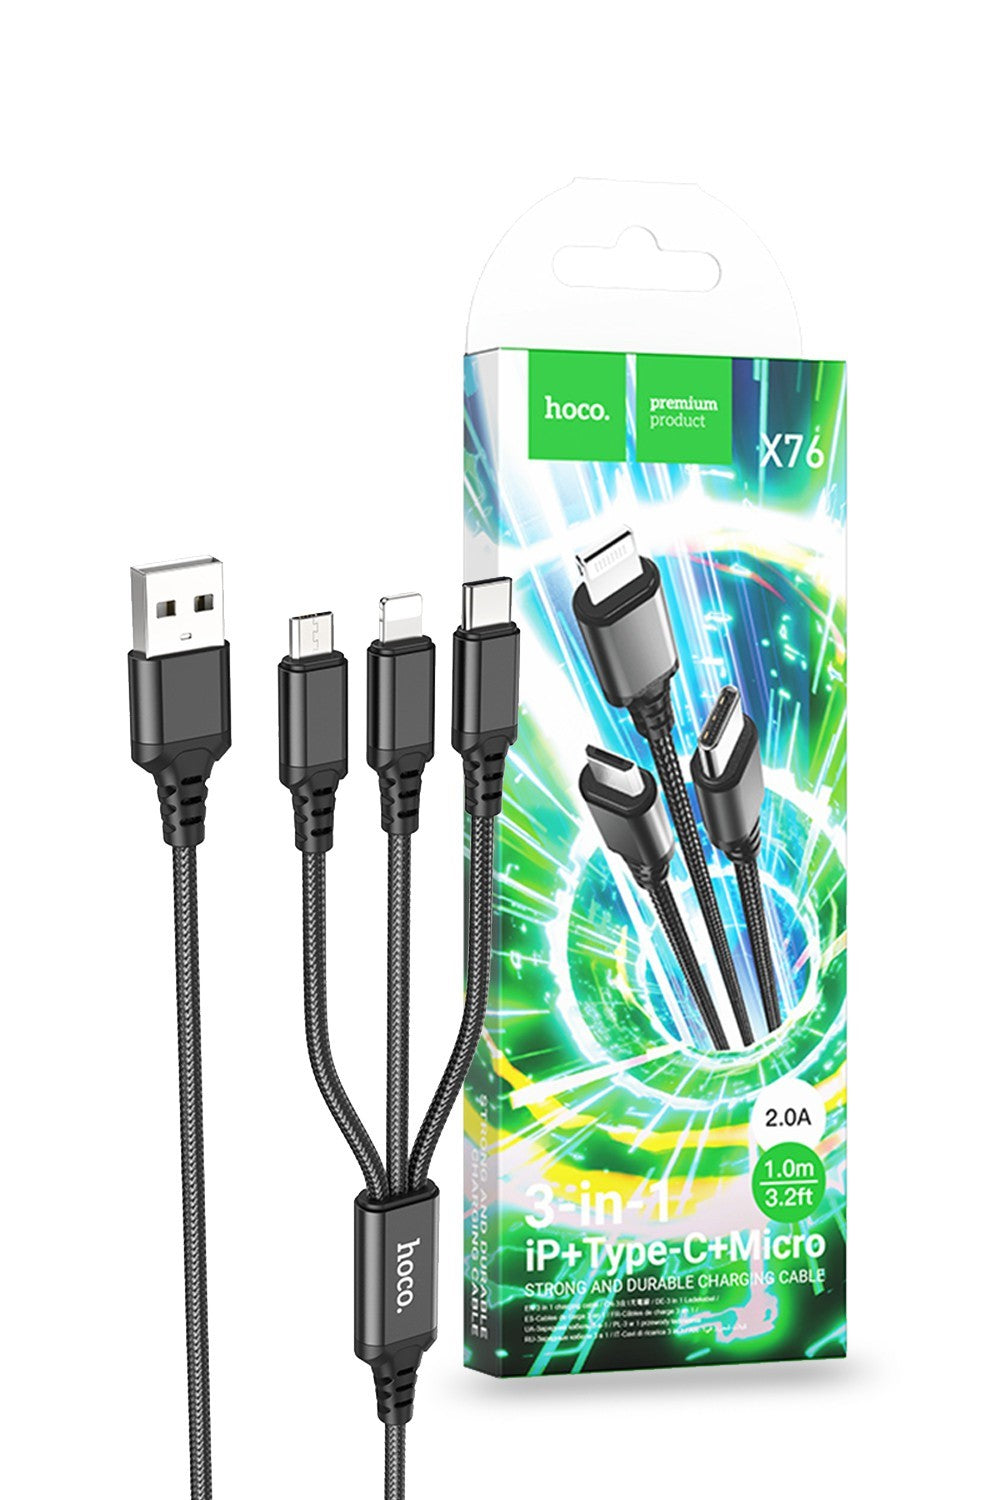 Hoco 3 in 1 USB to USB-C Lightning Micro-USB Charging Cable X76